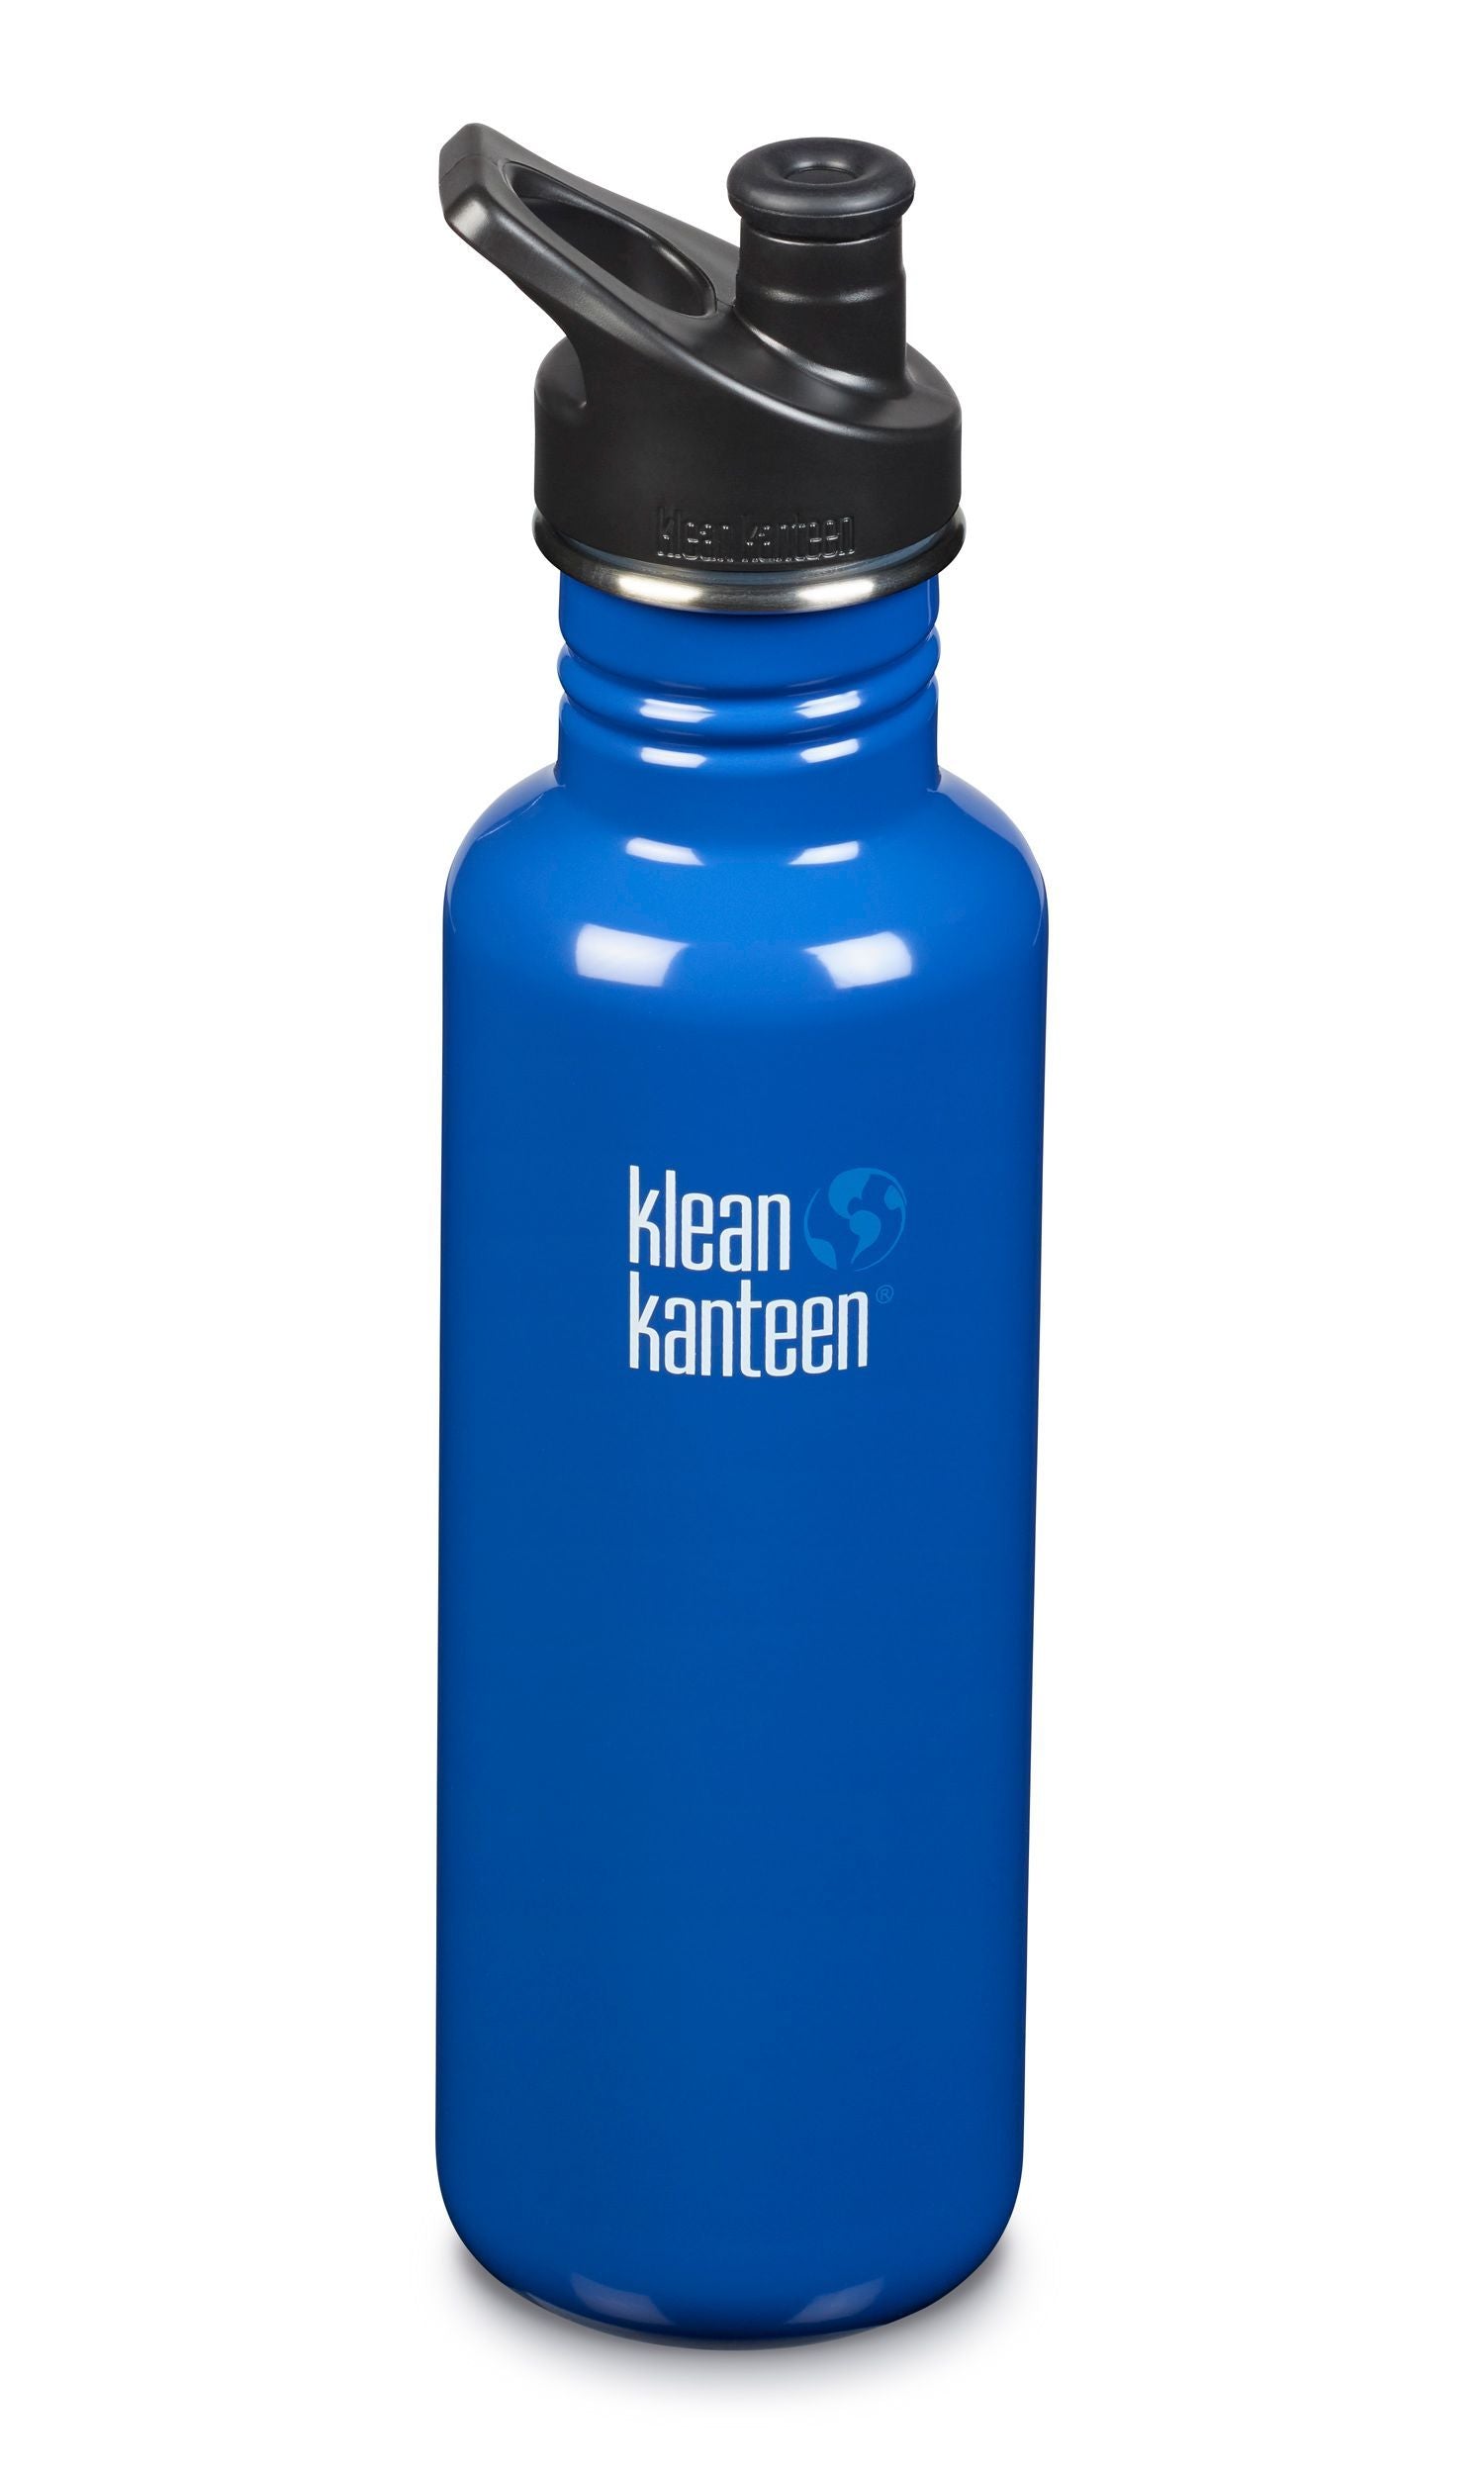 Orange/Red stainless steel water bottle with a black plastic sports cap. "Klean Kanteen" logo printed on bottle in white.